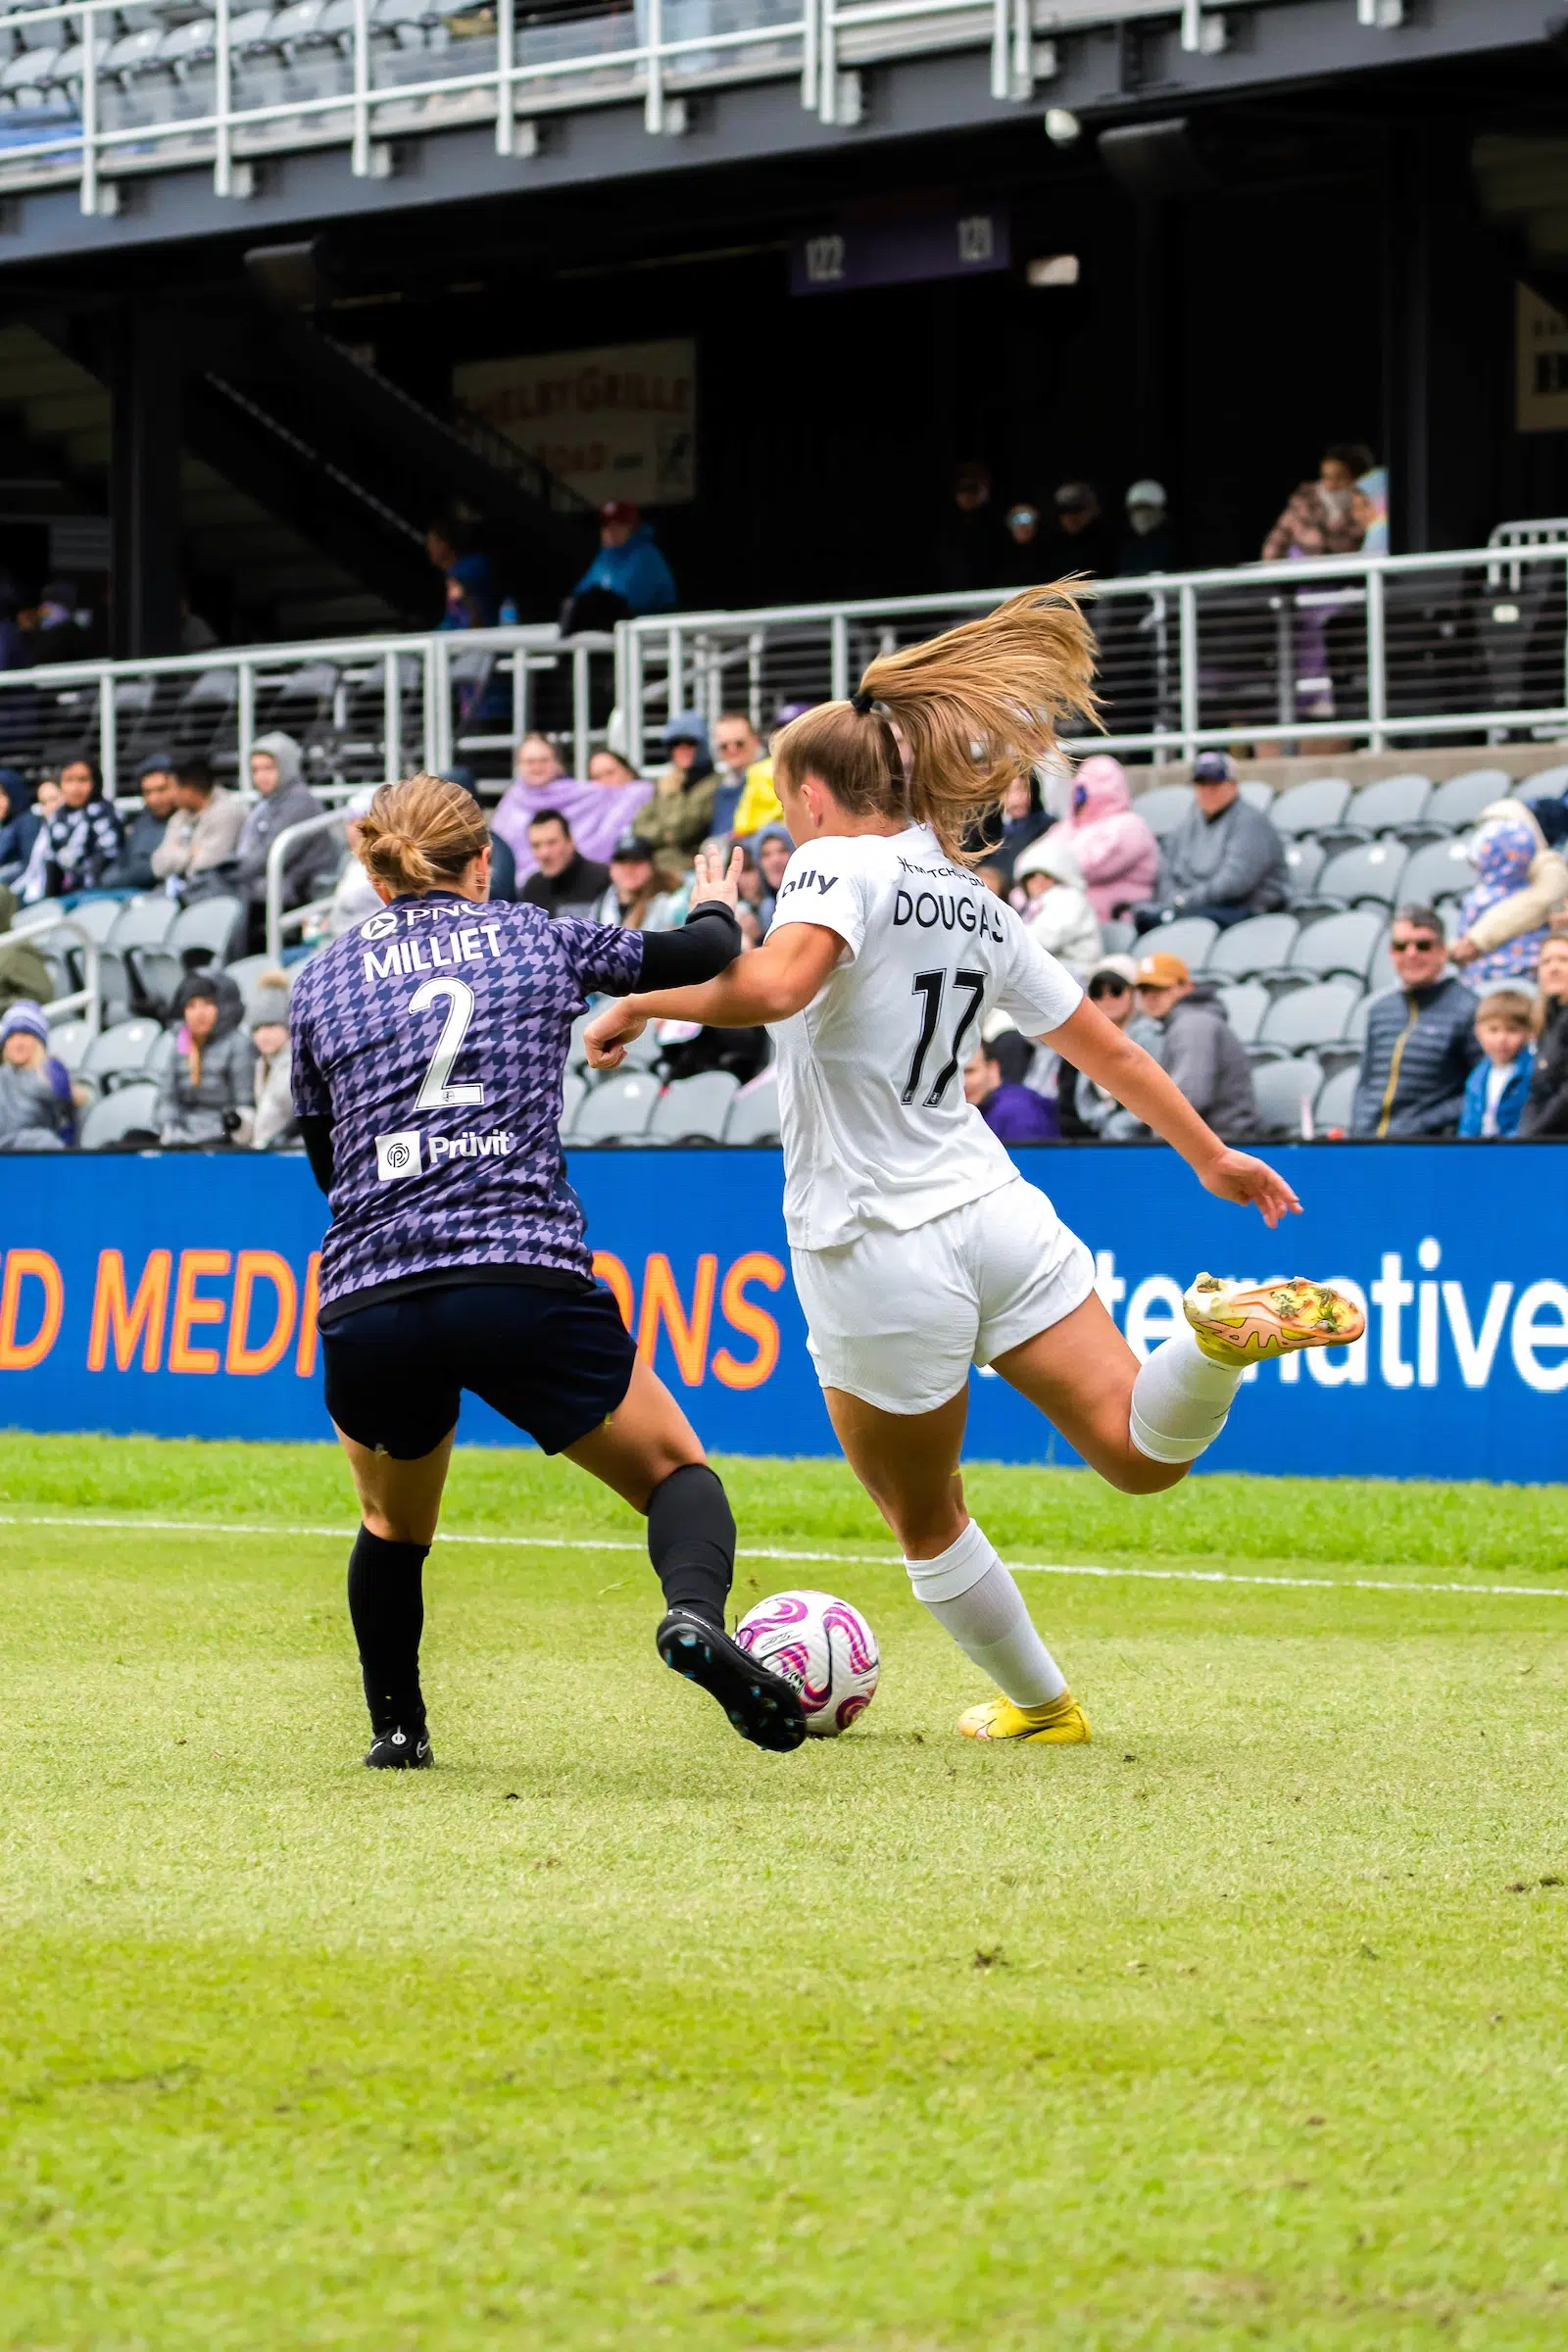 Two soccer players, one in an all-white uniform and one in a purple-and-black houndstooth uniform, battle for possession of a soccer ball.